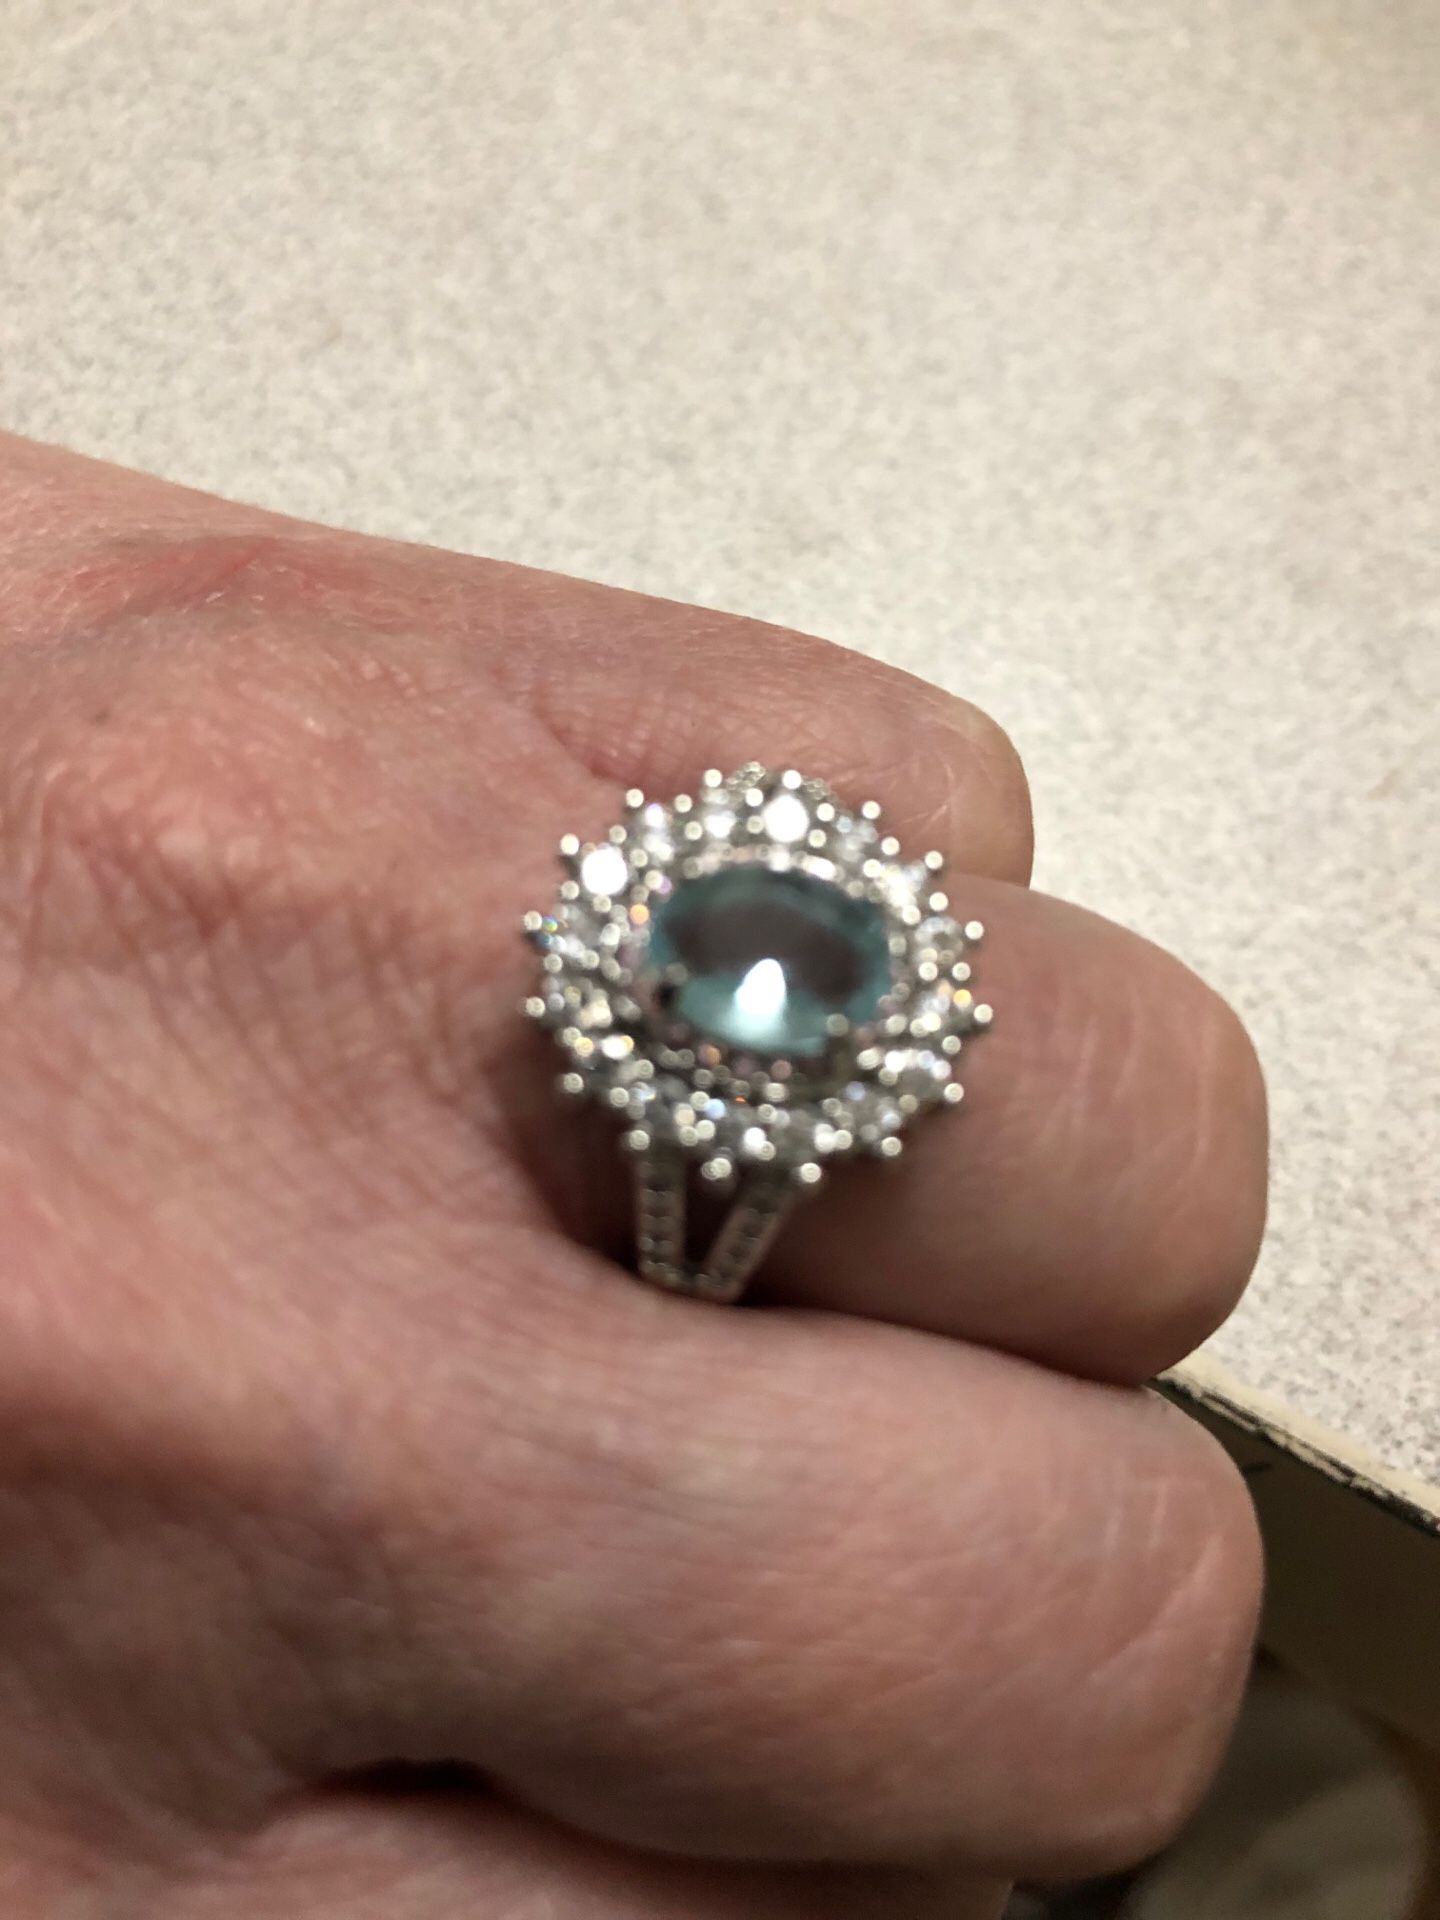 Here is a beautiful ring size 6